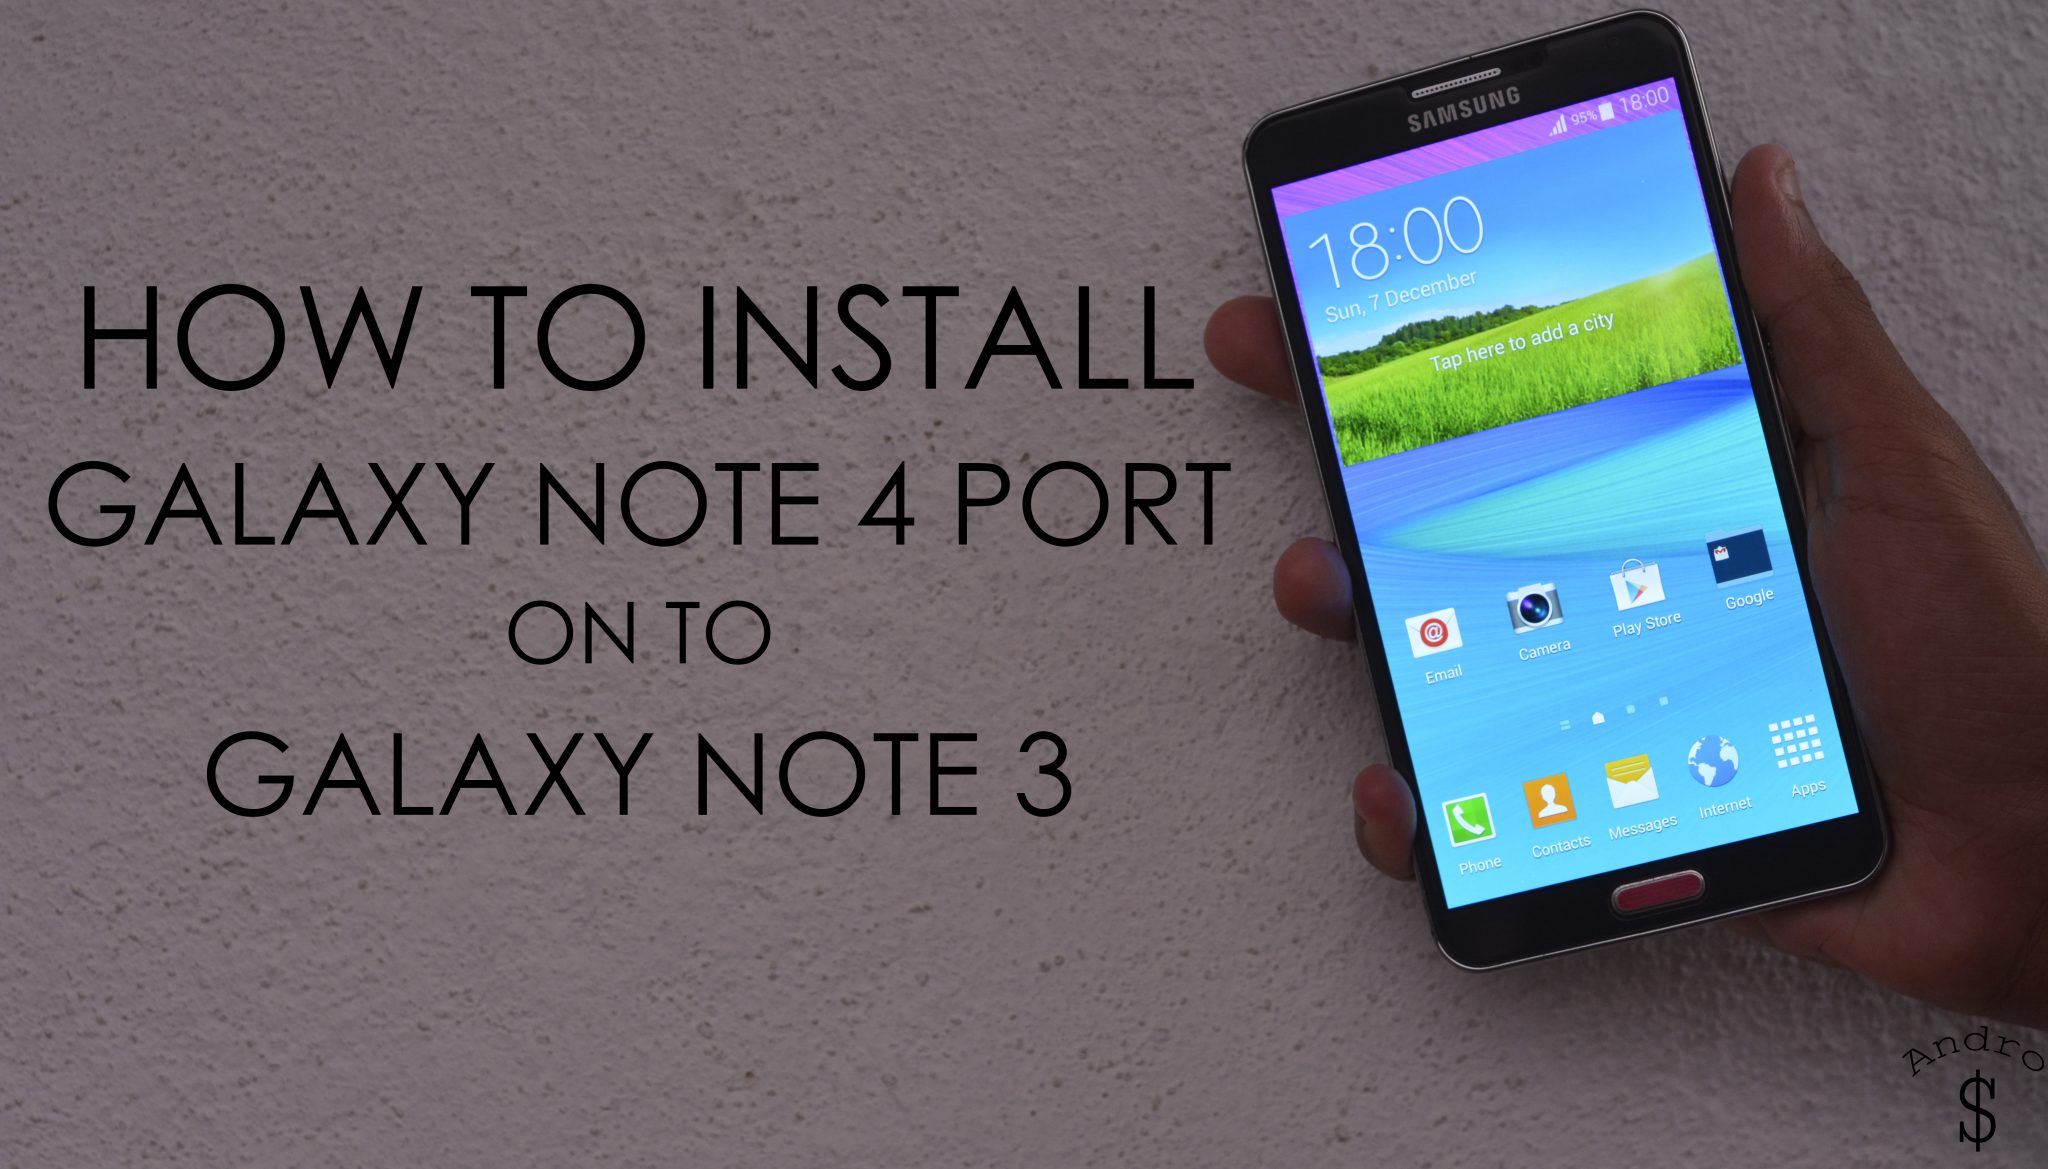 Galaxy Note 4 Port for Note 3